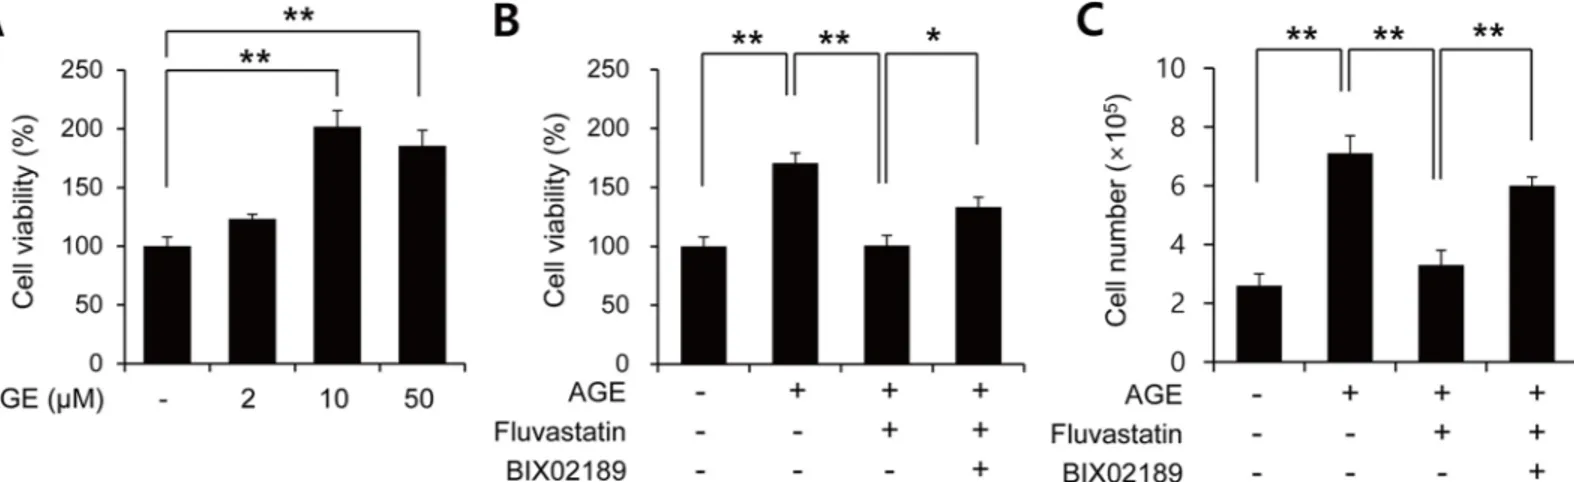 Fig 3. Fluvastatin inhibited AGEs-induced cell proliferation through the ERK5-Nrf2 pathway in VSMCs